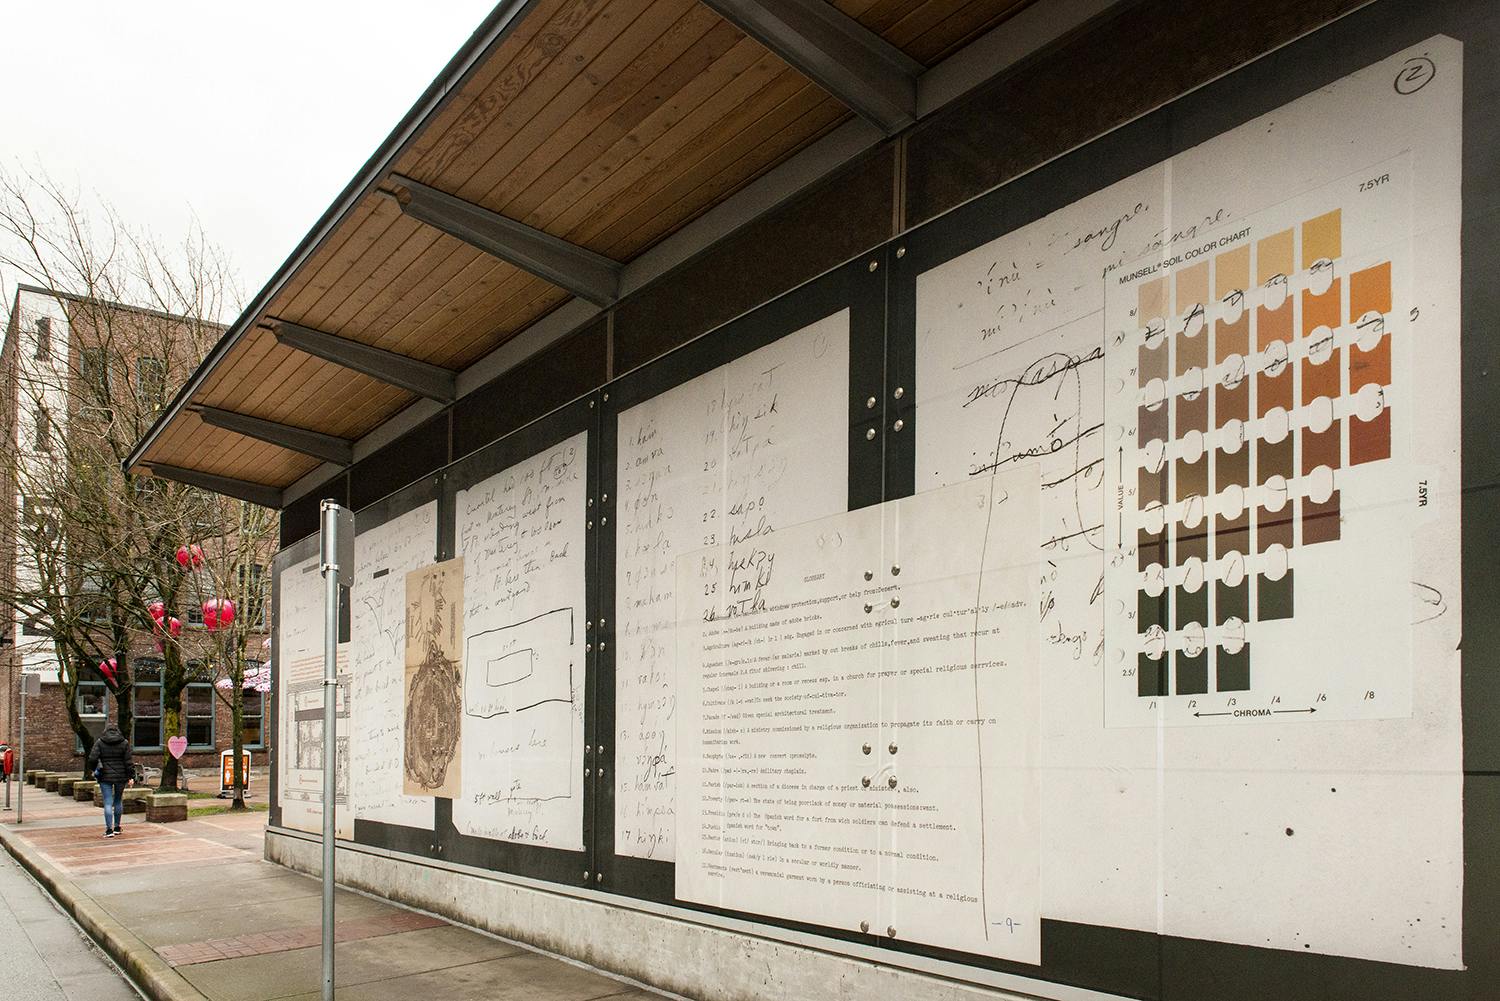 An exterior view of a train station displaying Sandoval’s work on the glass facade printed in vinyl. The work depicts a collage of scanned and enlarged archival documents, including written notes. 